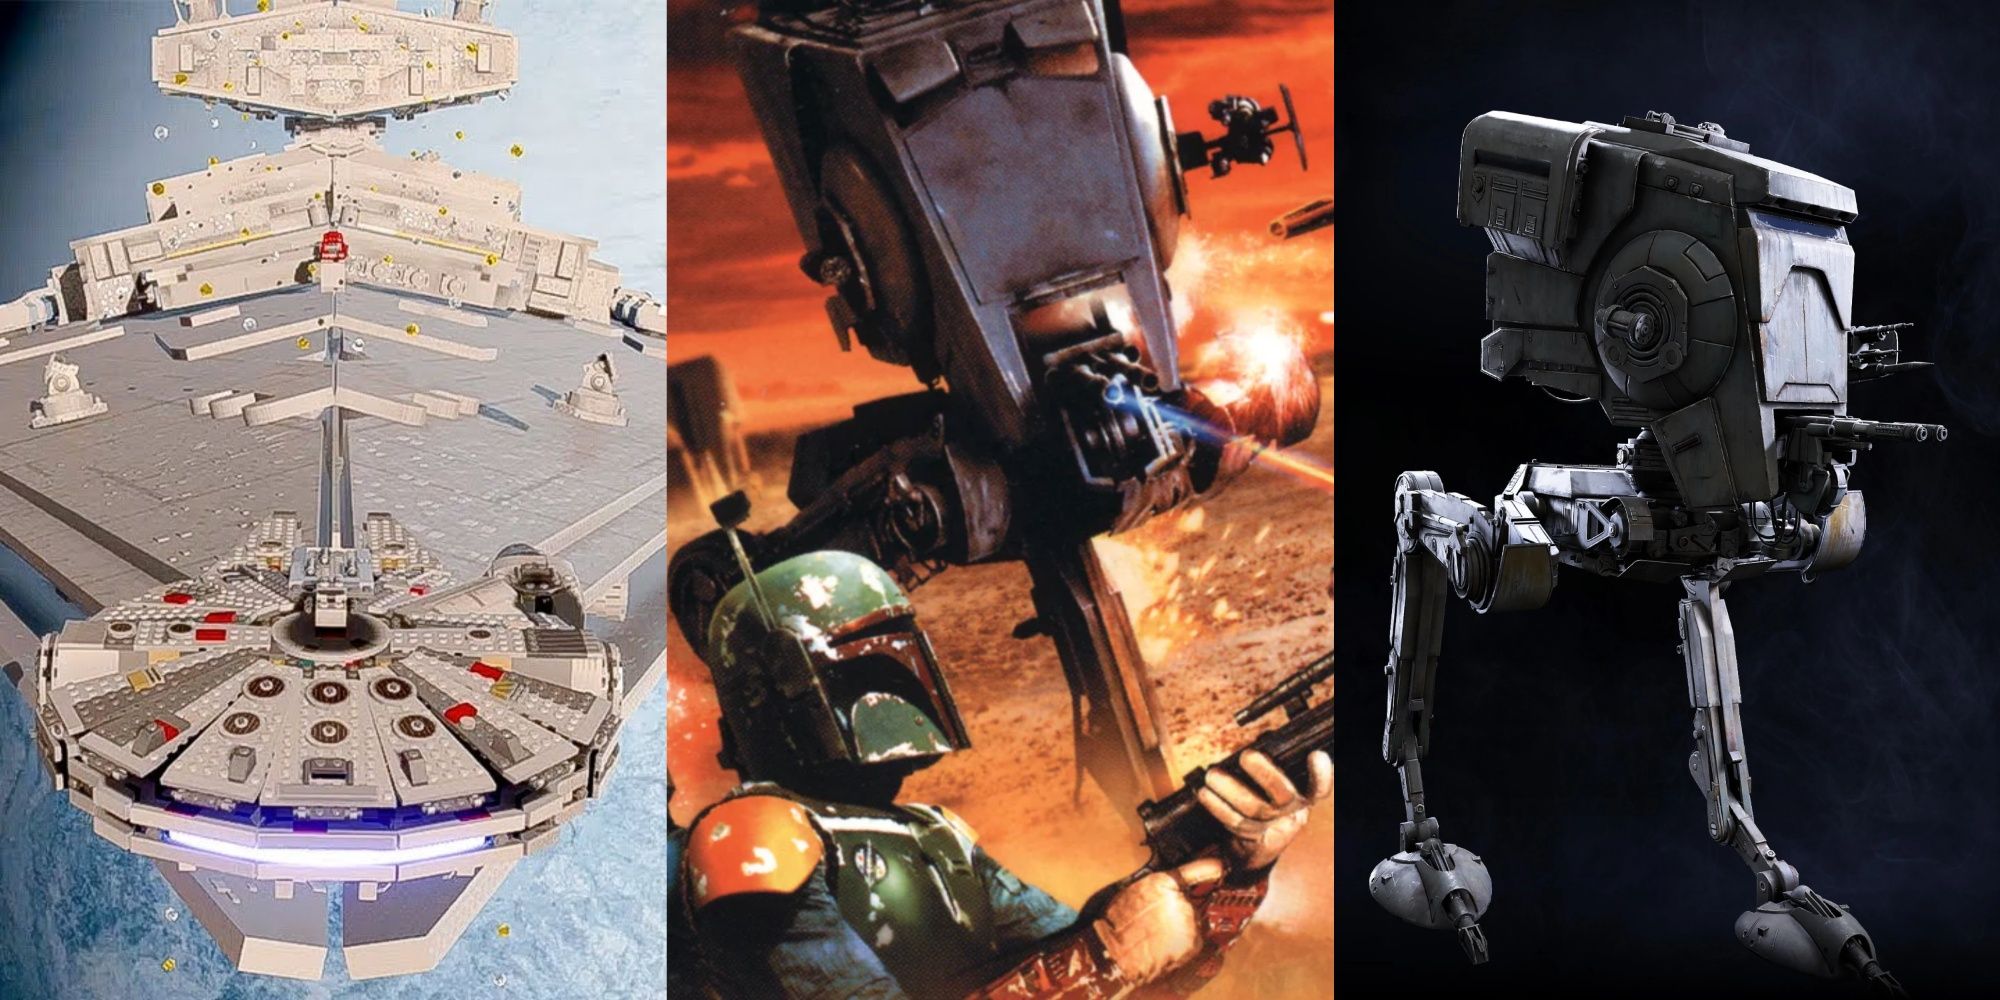 The Best Star Wars Game Vehicles - The Lego Millennium Falcon, Star Wars Demolition Box Art and an AT-ST from Star Wars Battlefront 2